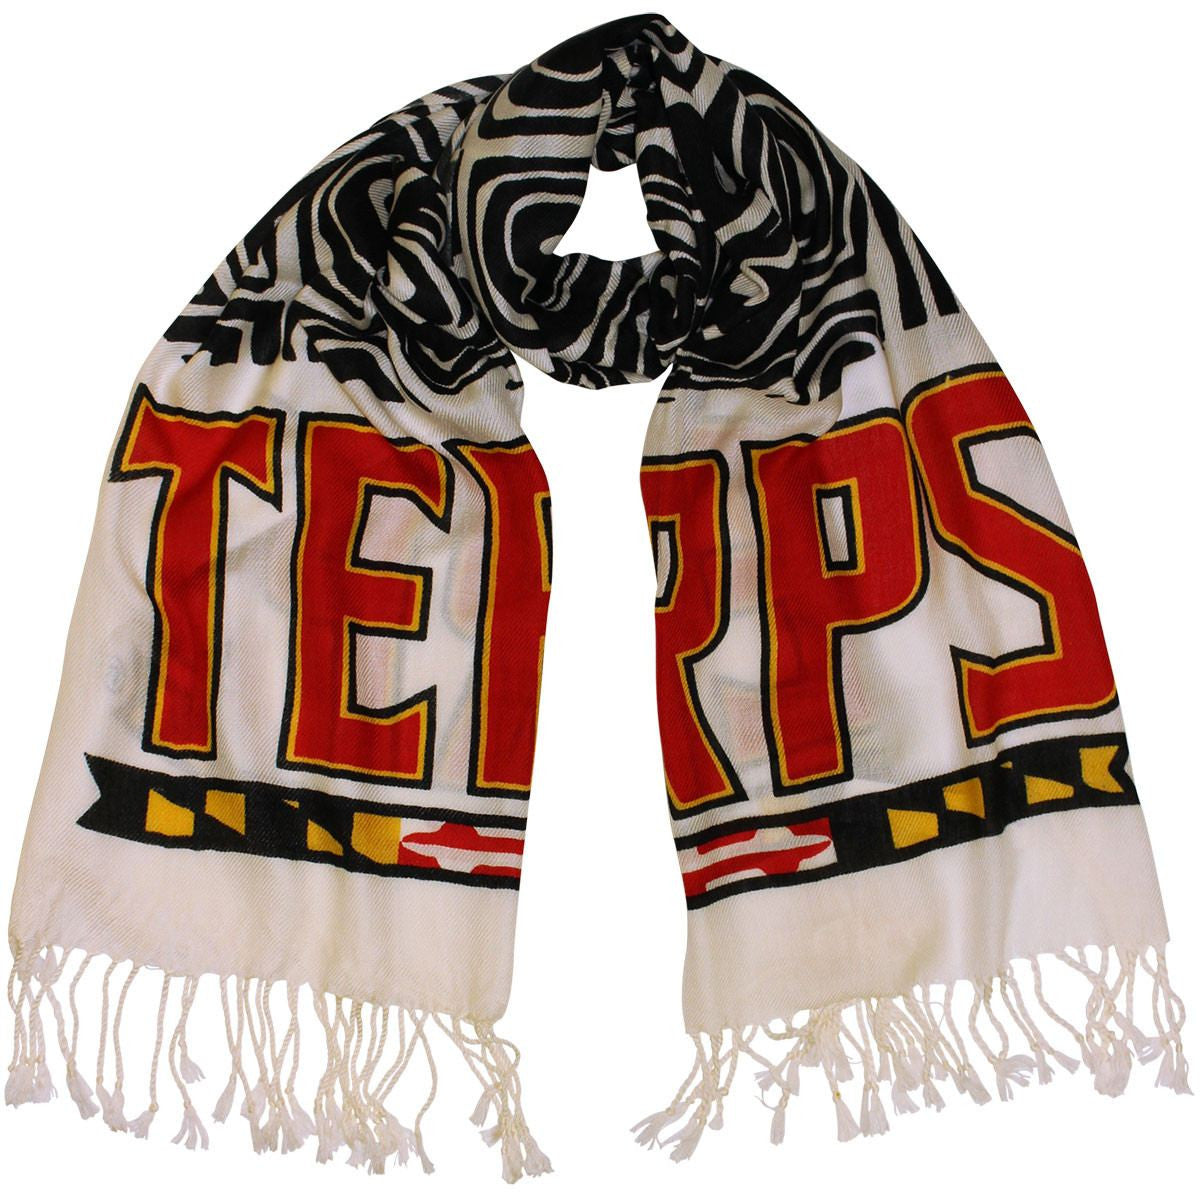 UMD Terps & Turtle Shell (White & Black) / Scarf - Route One Apparel